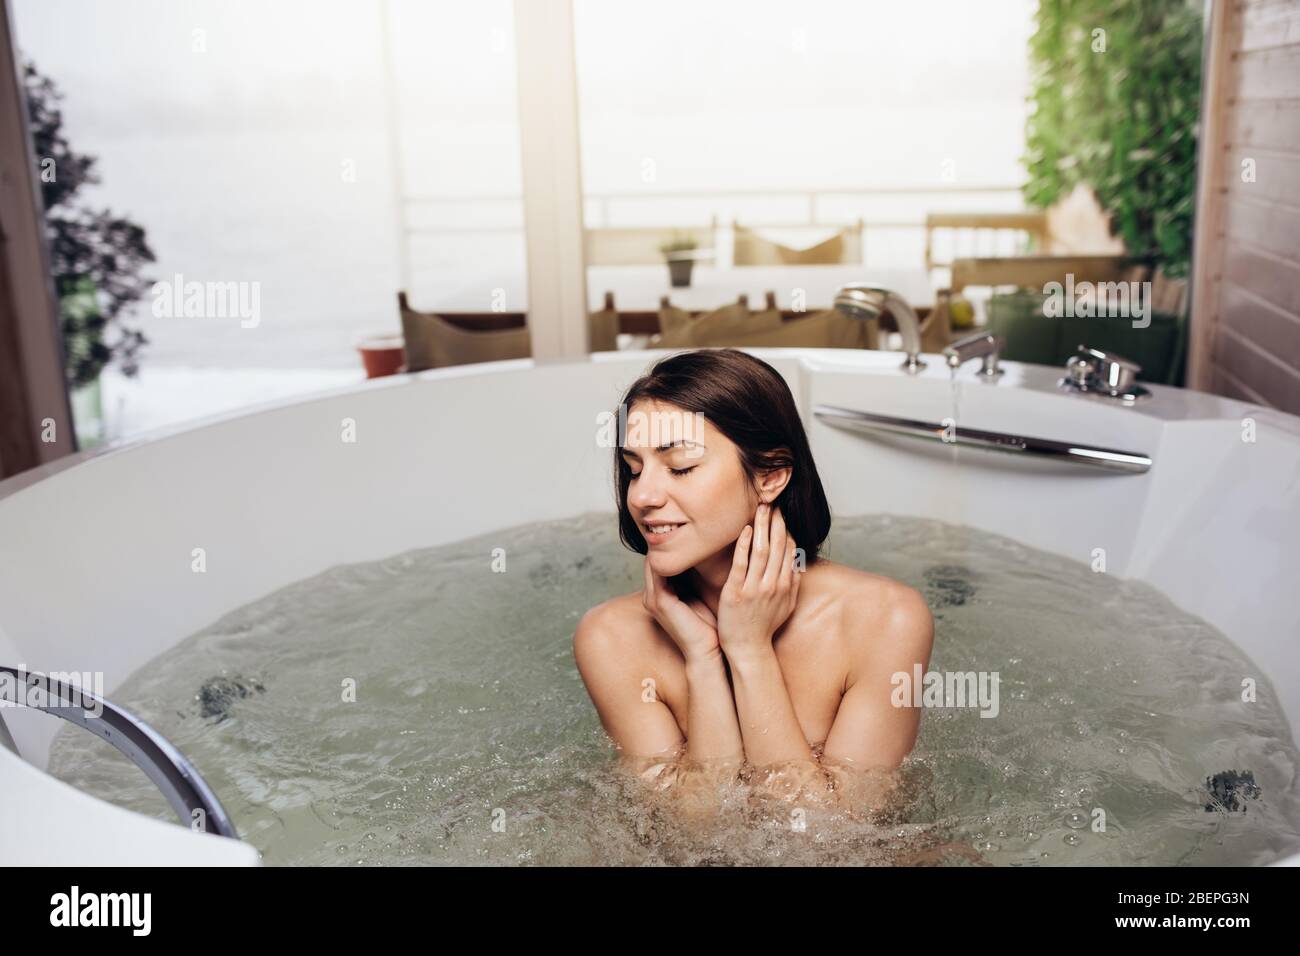 Woman relaxing at home in the hot tub bath ritual.Spa day moment in modern bathroom indoors jacuzzi tub.Leisure activity.Self care.Good personal hygie Stock Photo